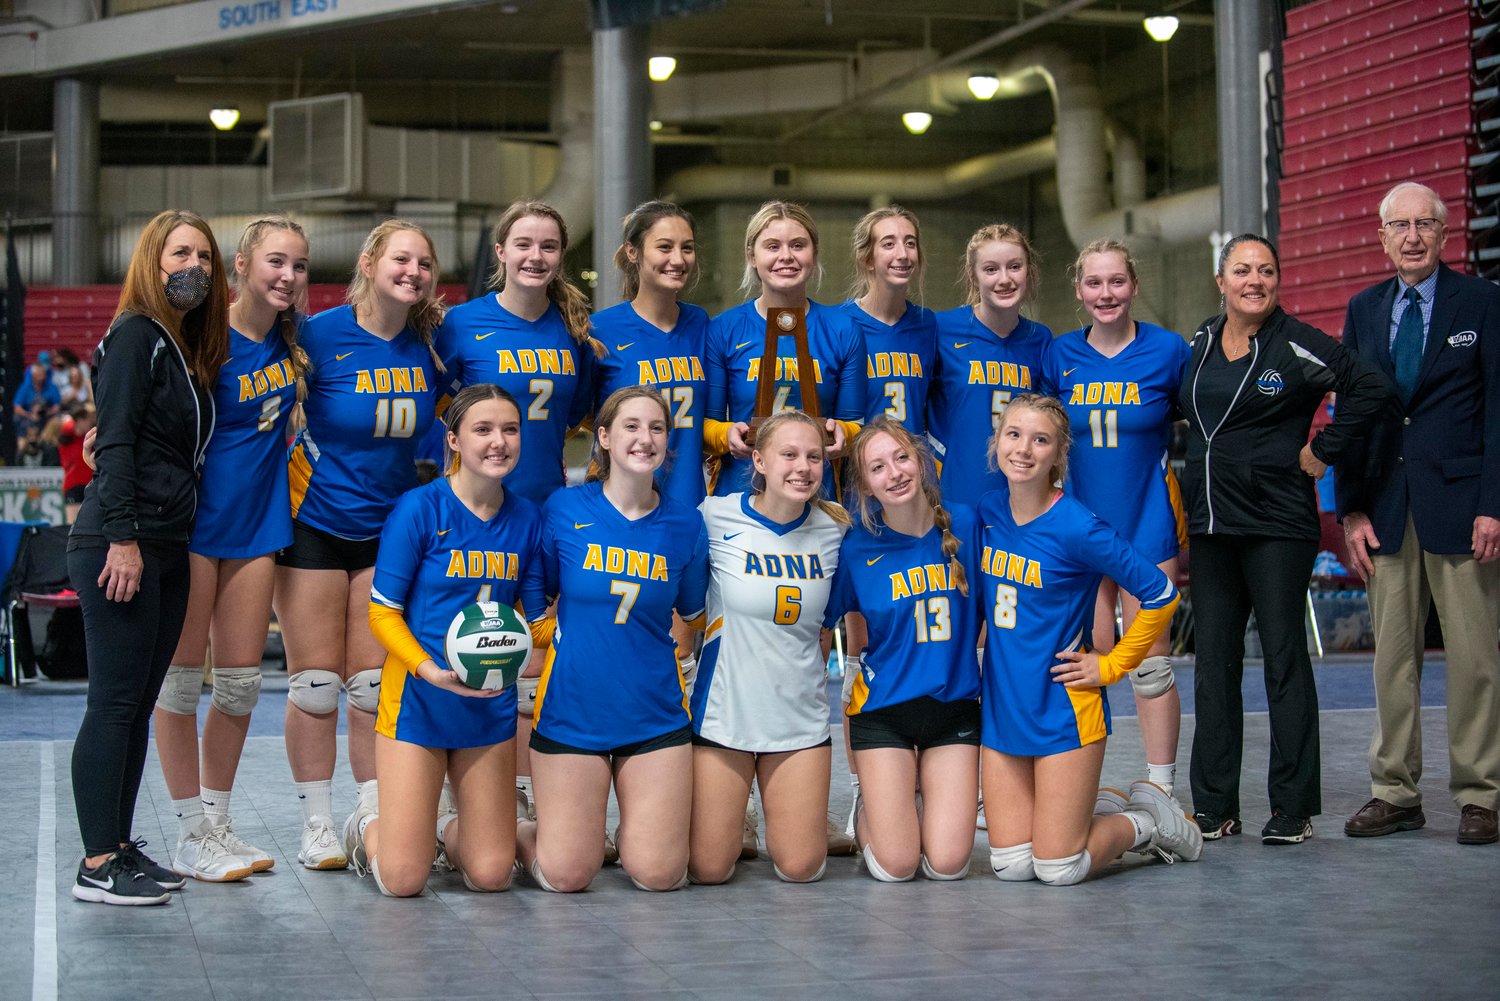 Adna poses with the 8th-place trophy at the 2B state voleyball tournament Friday in Yakima.